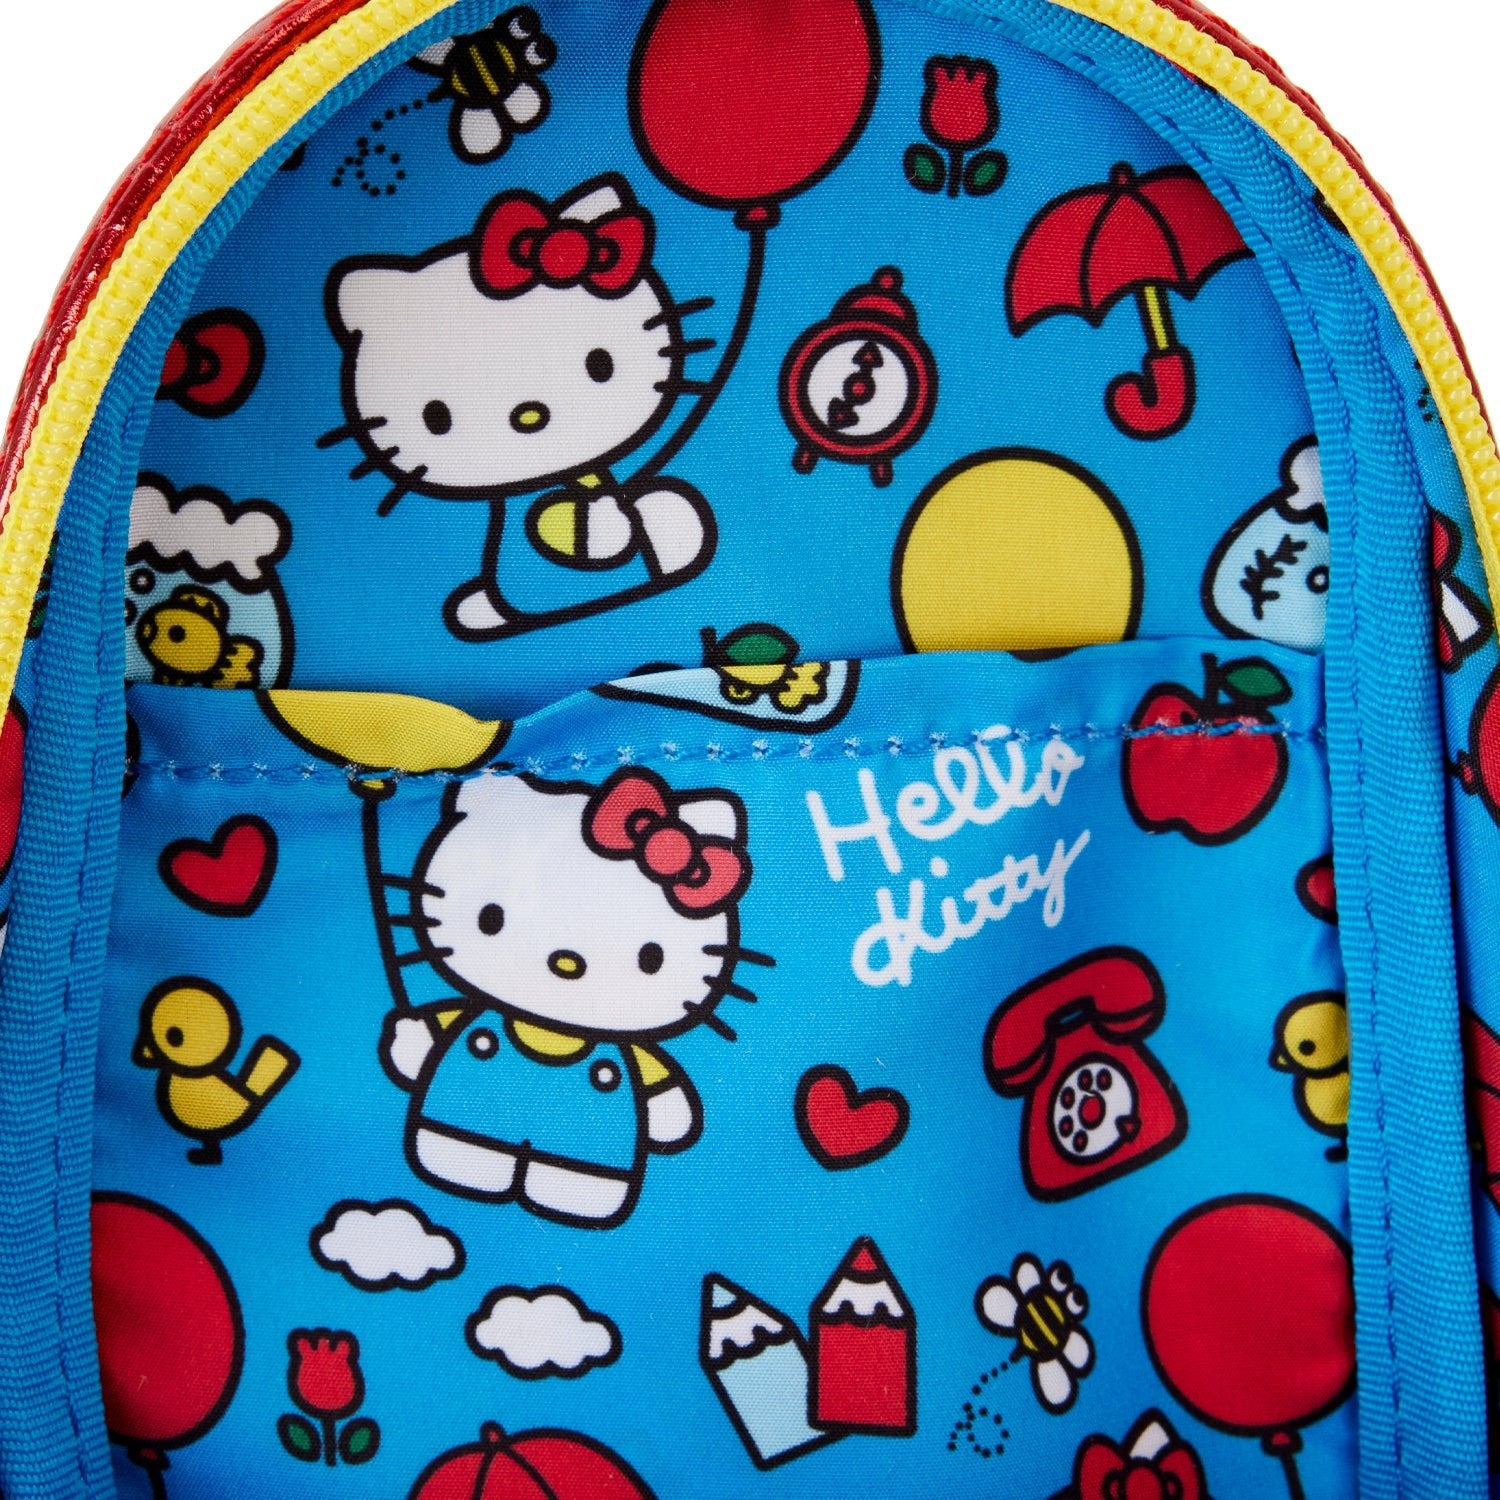 Loungefly x Sanrio Hello Kitty 50th Anniversary Pencil Case - GeekCore